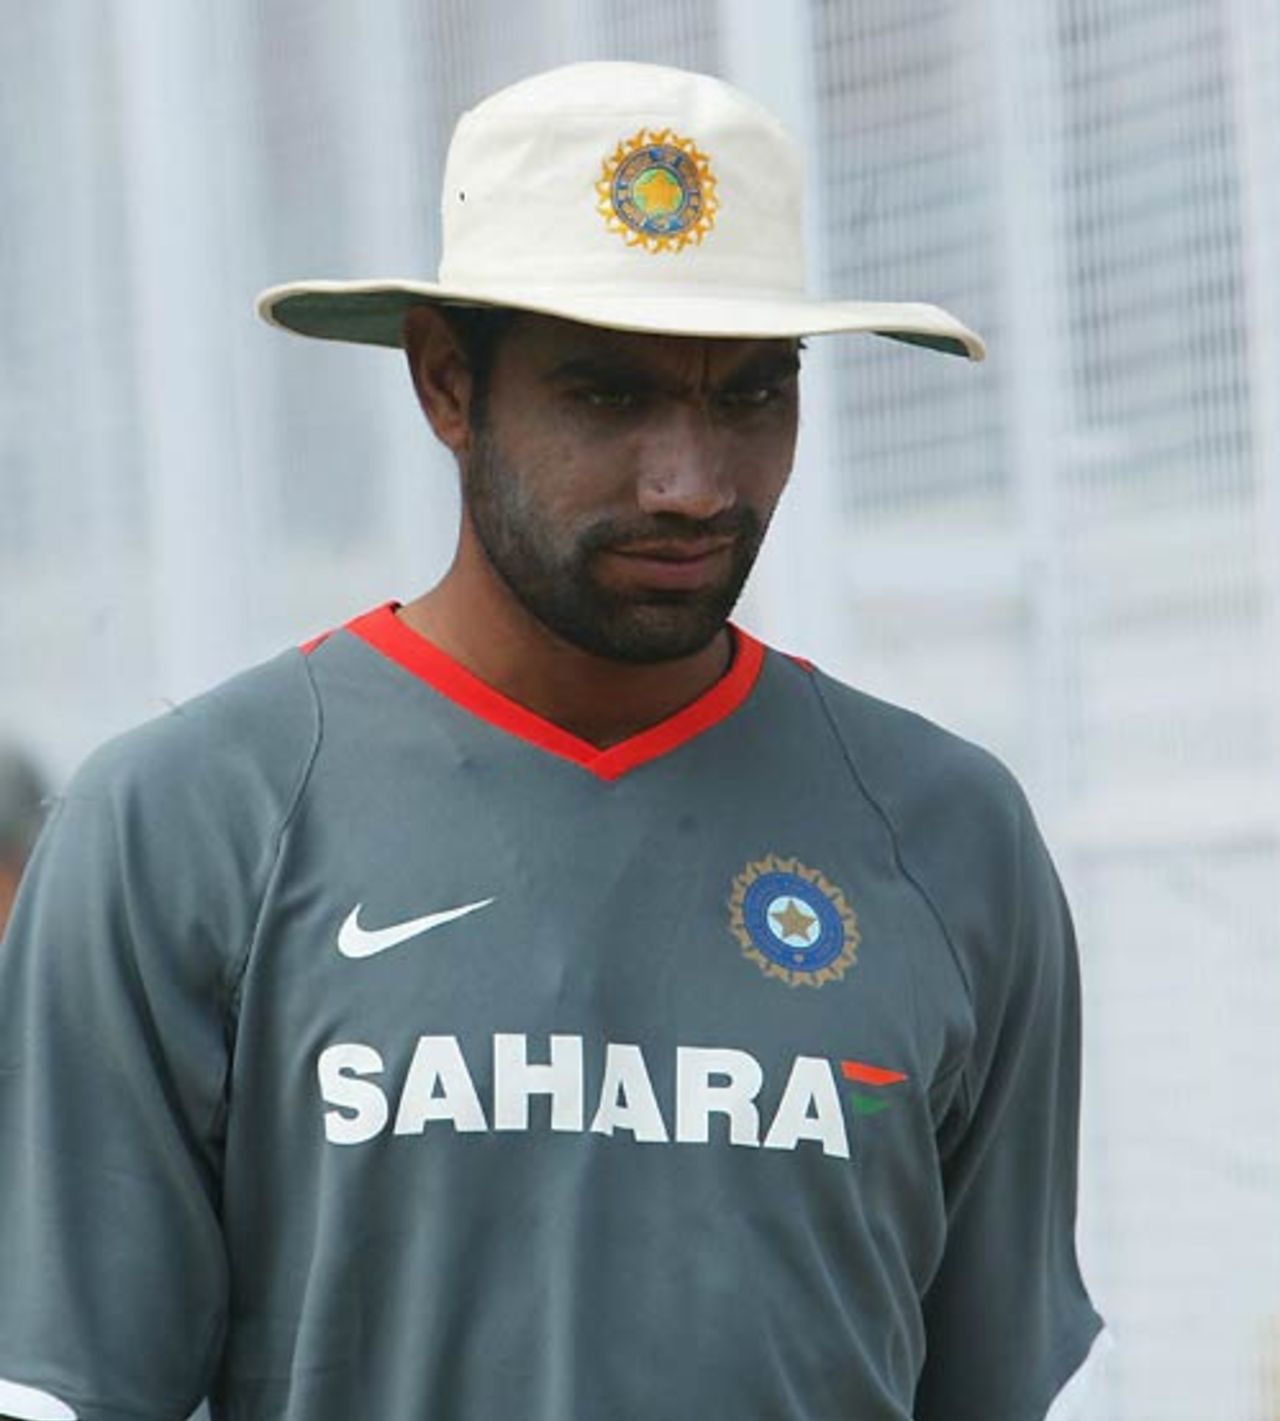 Munaf Patel is deep in thought during a practice session, Ahmedabad, April 7, 2008